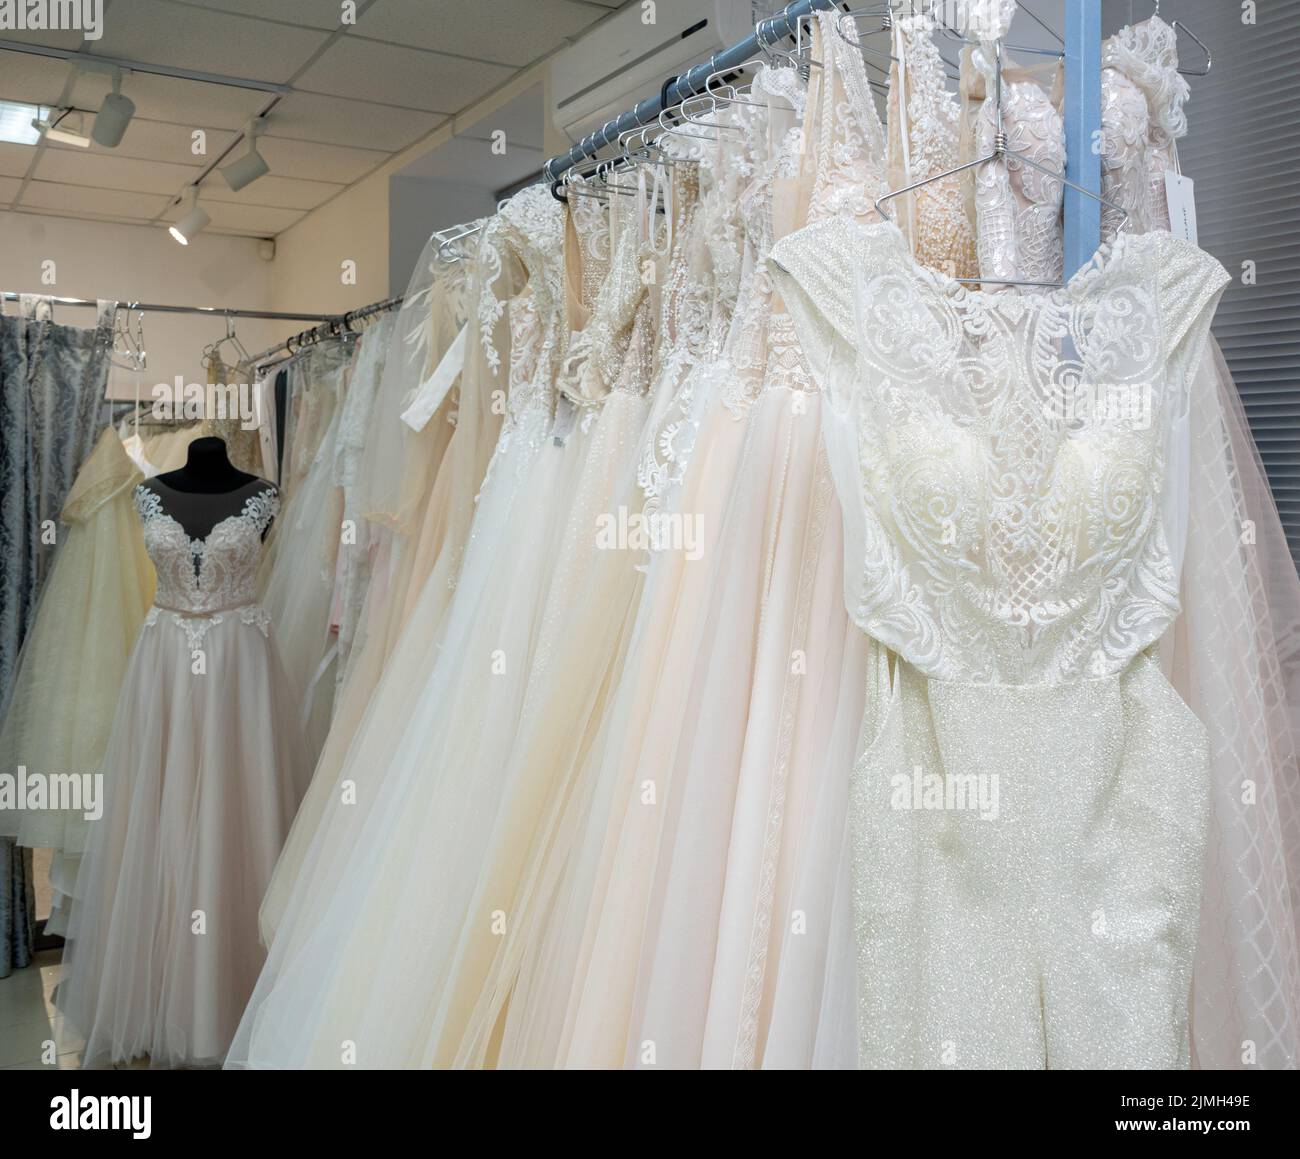 White and cream wedding dresses on a hanger in a bridal boutique Stock Photo